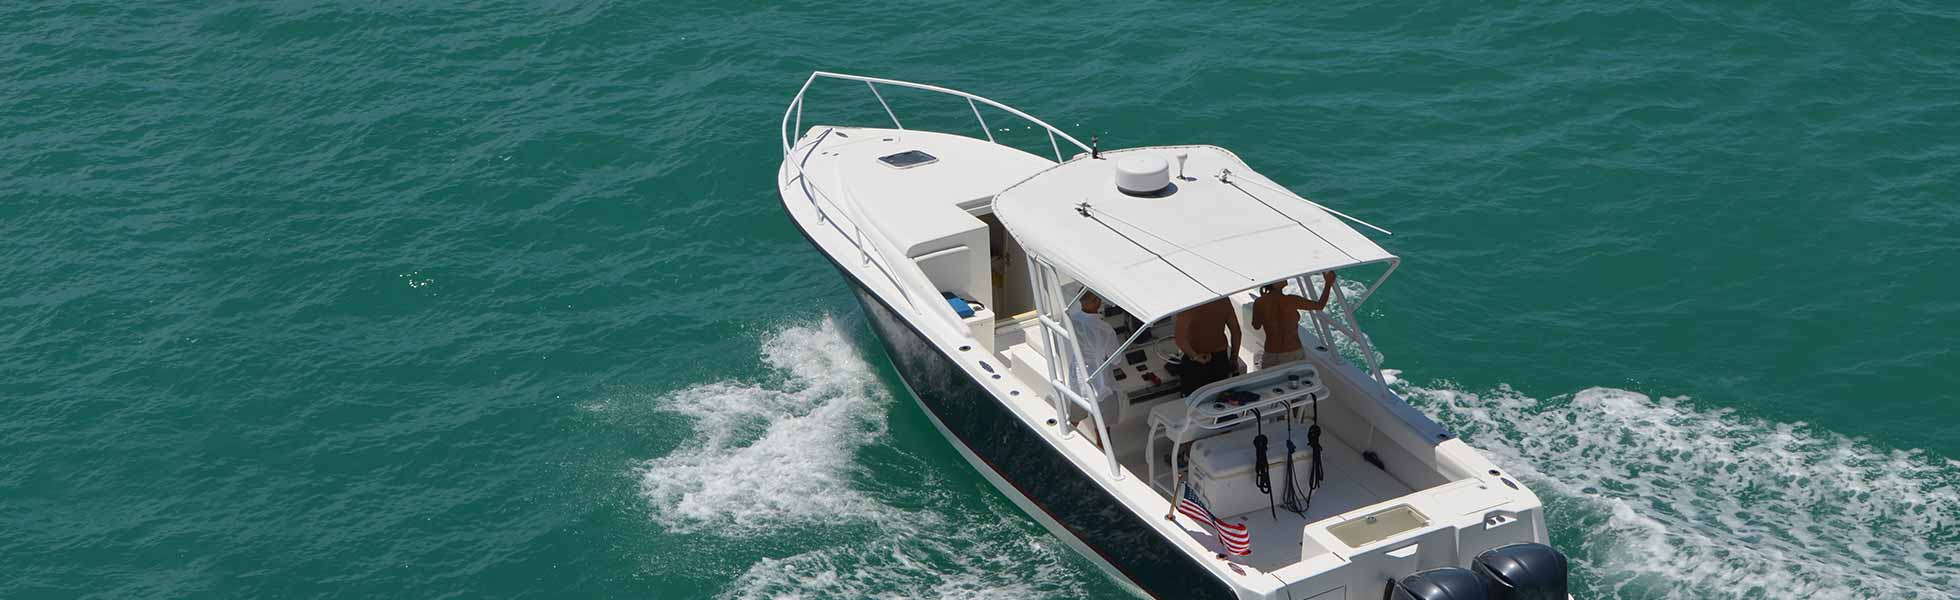 Boat Insurance with Absolute Insurance Inc.